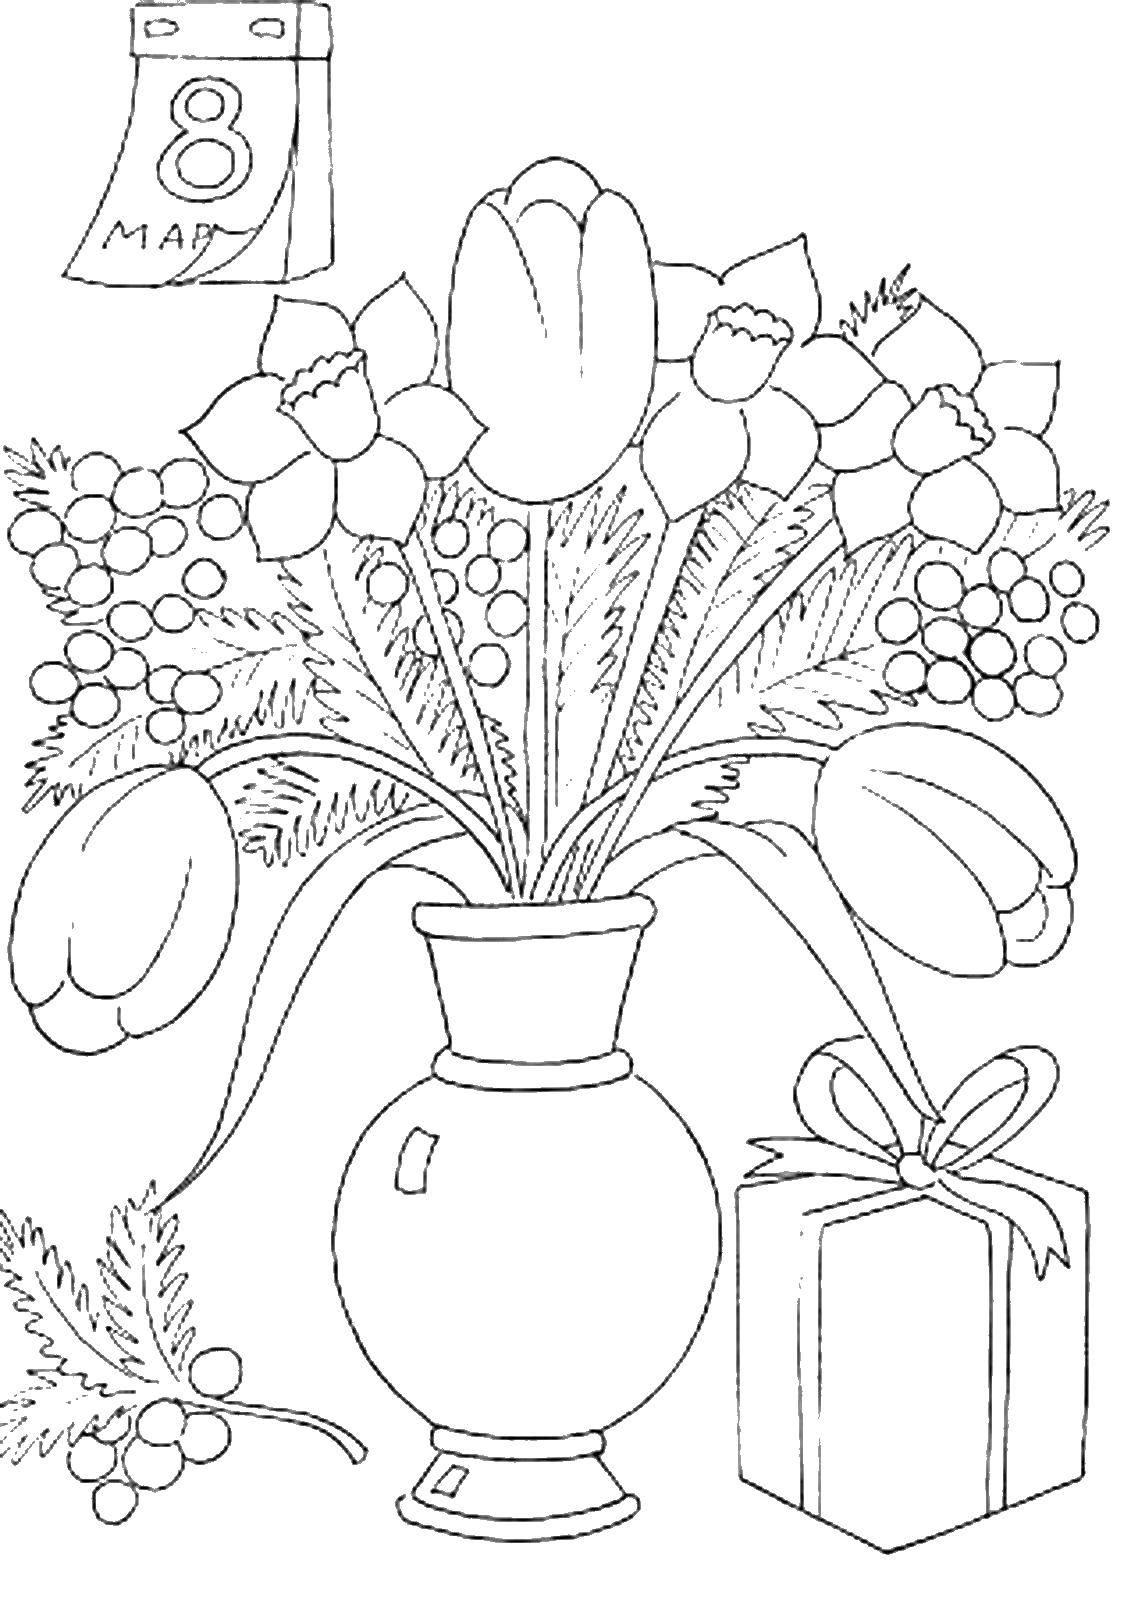 Coloring Flowers on March 8. Category spring. Tags:  flowers, March.